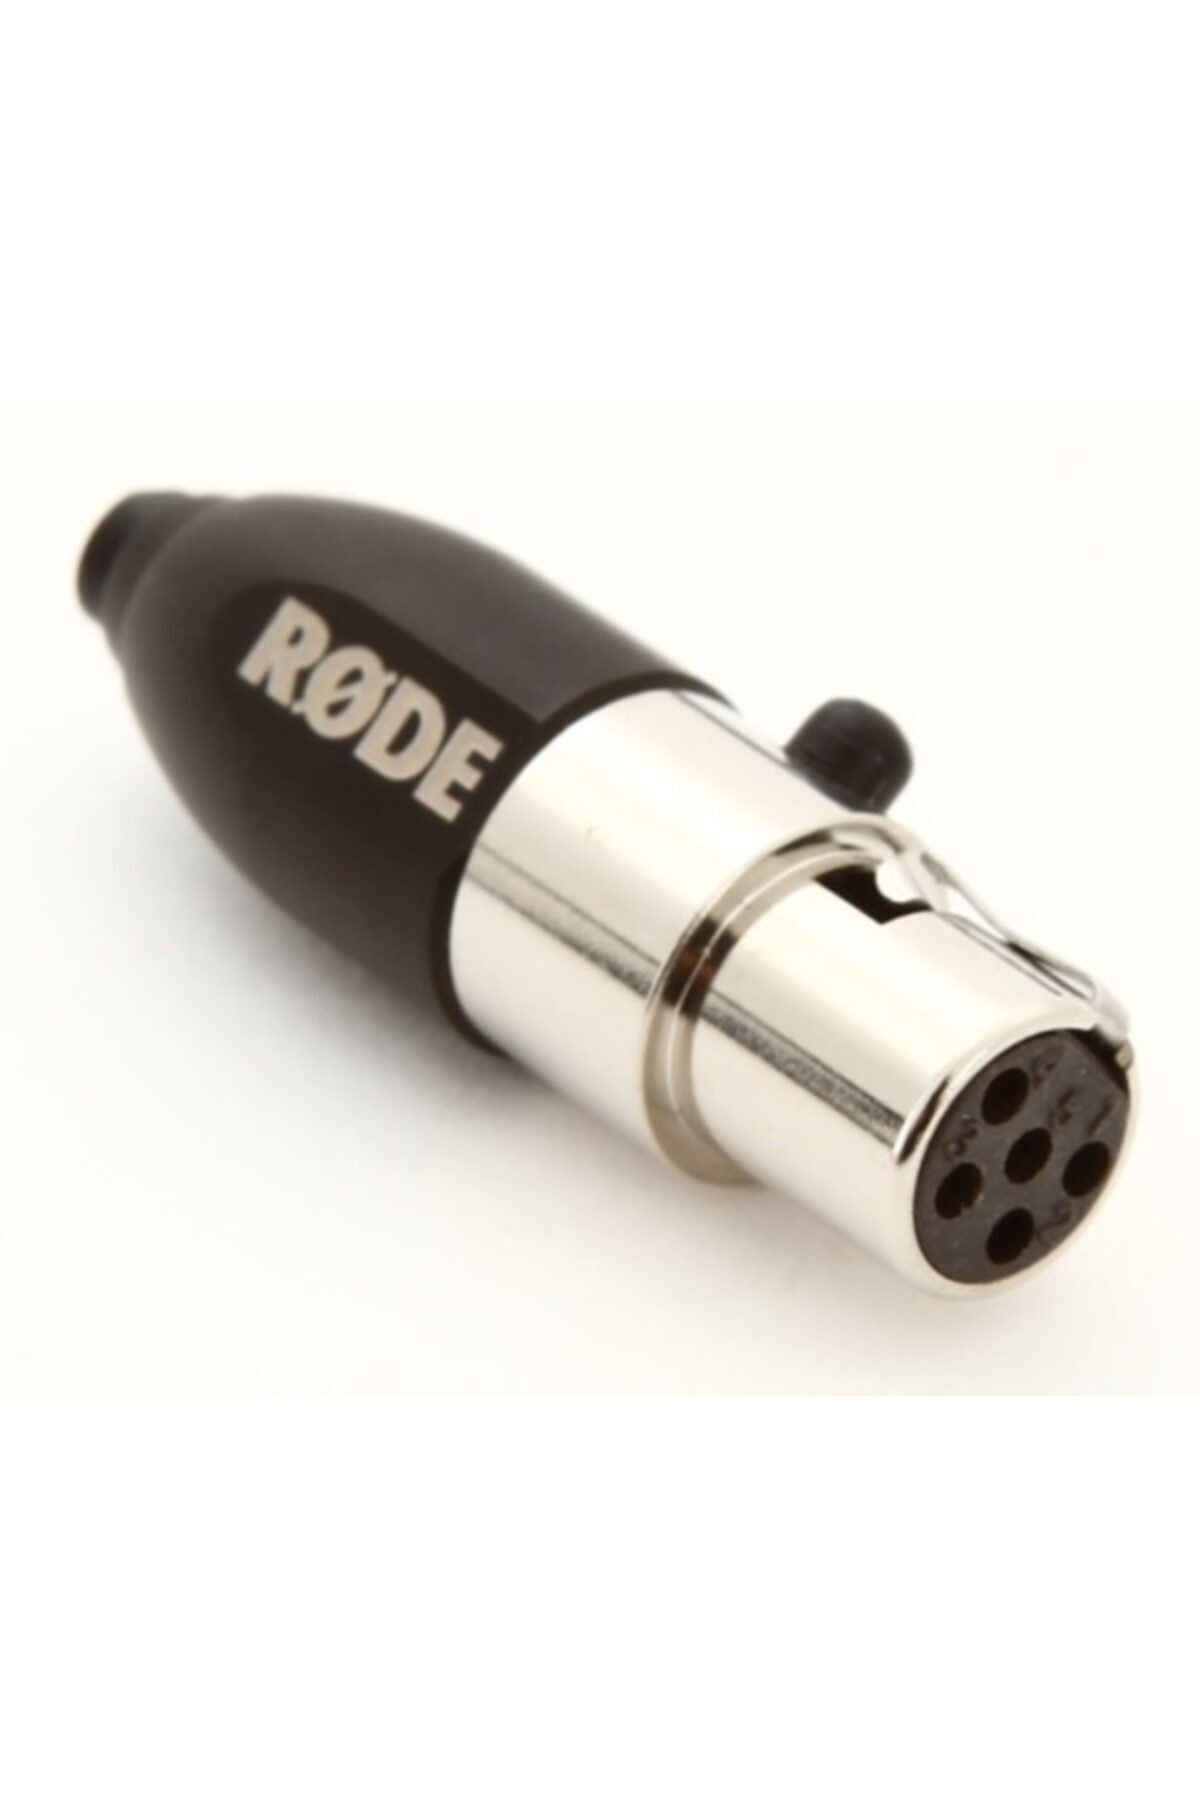 Rode Micon 7 Adapter For Lectrosonic Adaptör